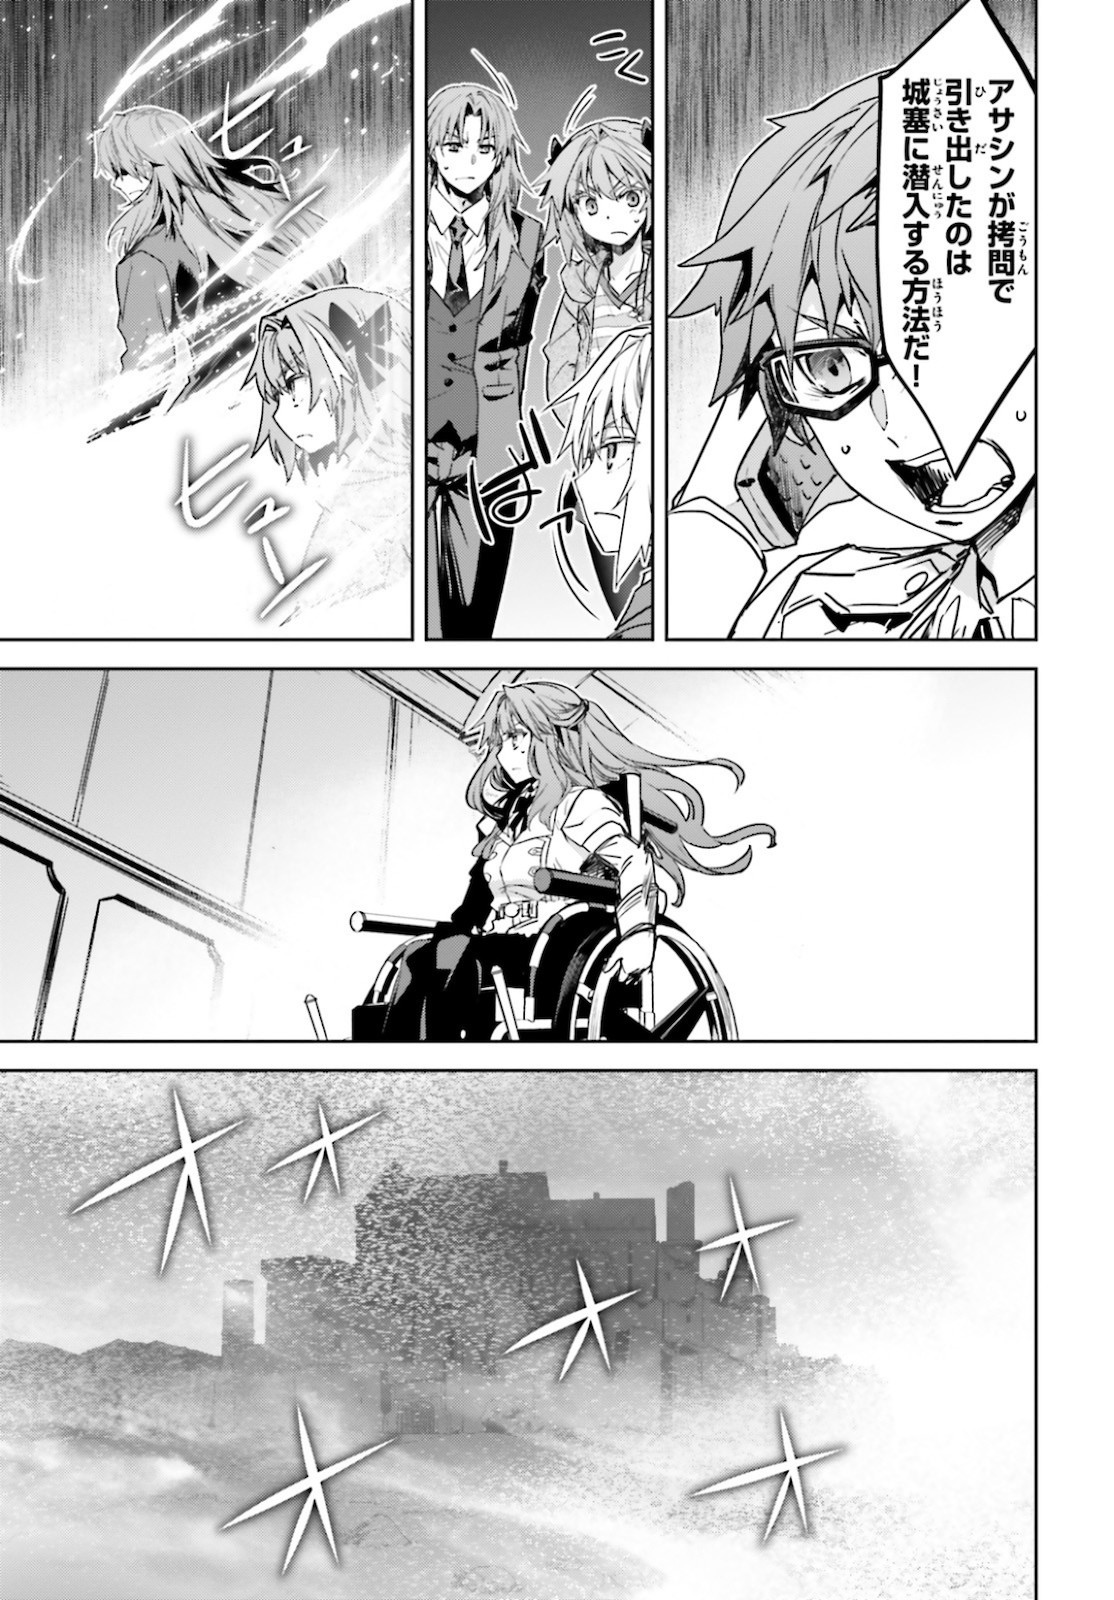 Fate-Apocrypha - Chapter 45 - Page 3